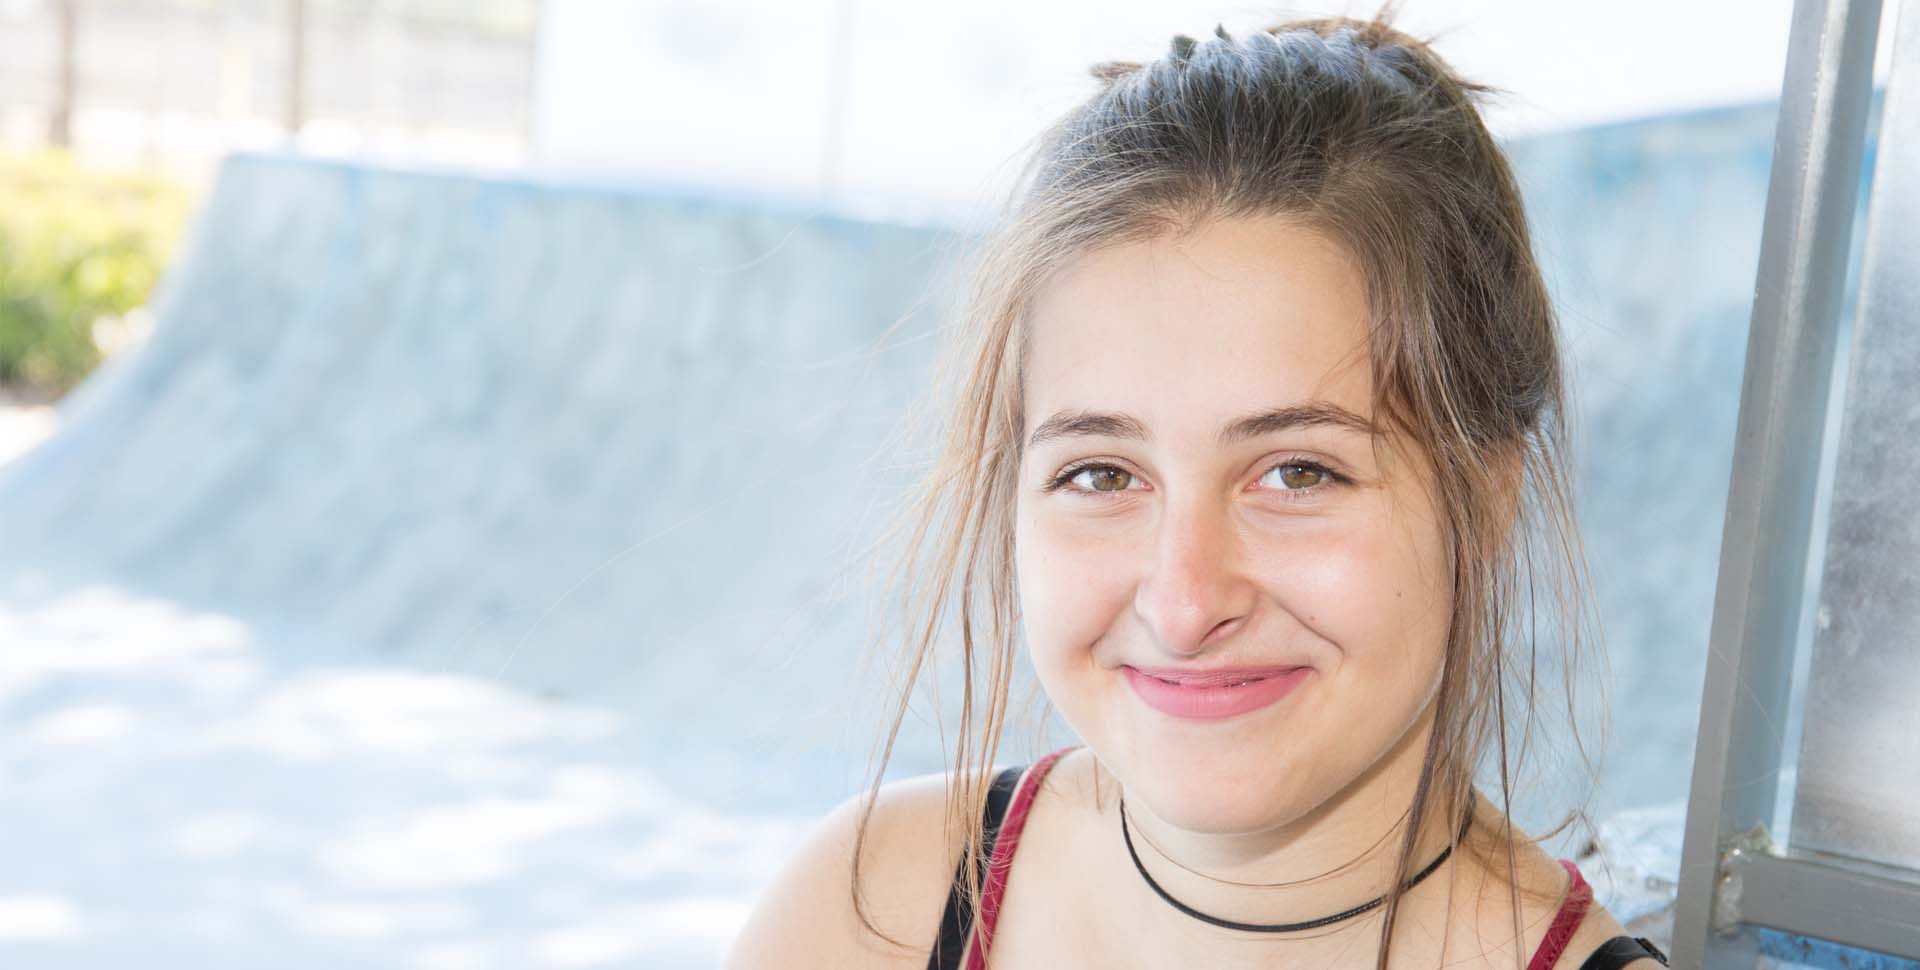 Kirra takes a leap of faith and finds work after receiving Youth Off The Streets' training and employment for young people.